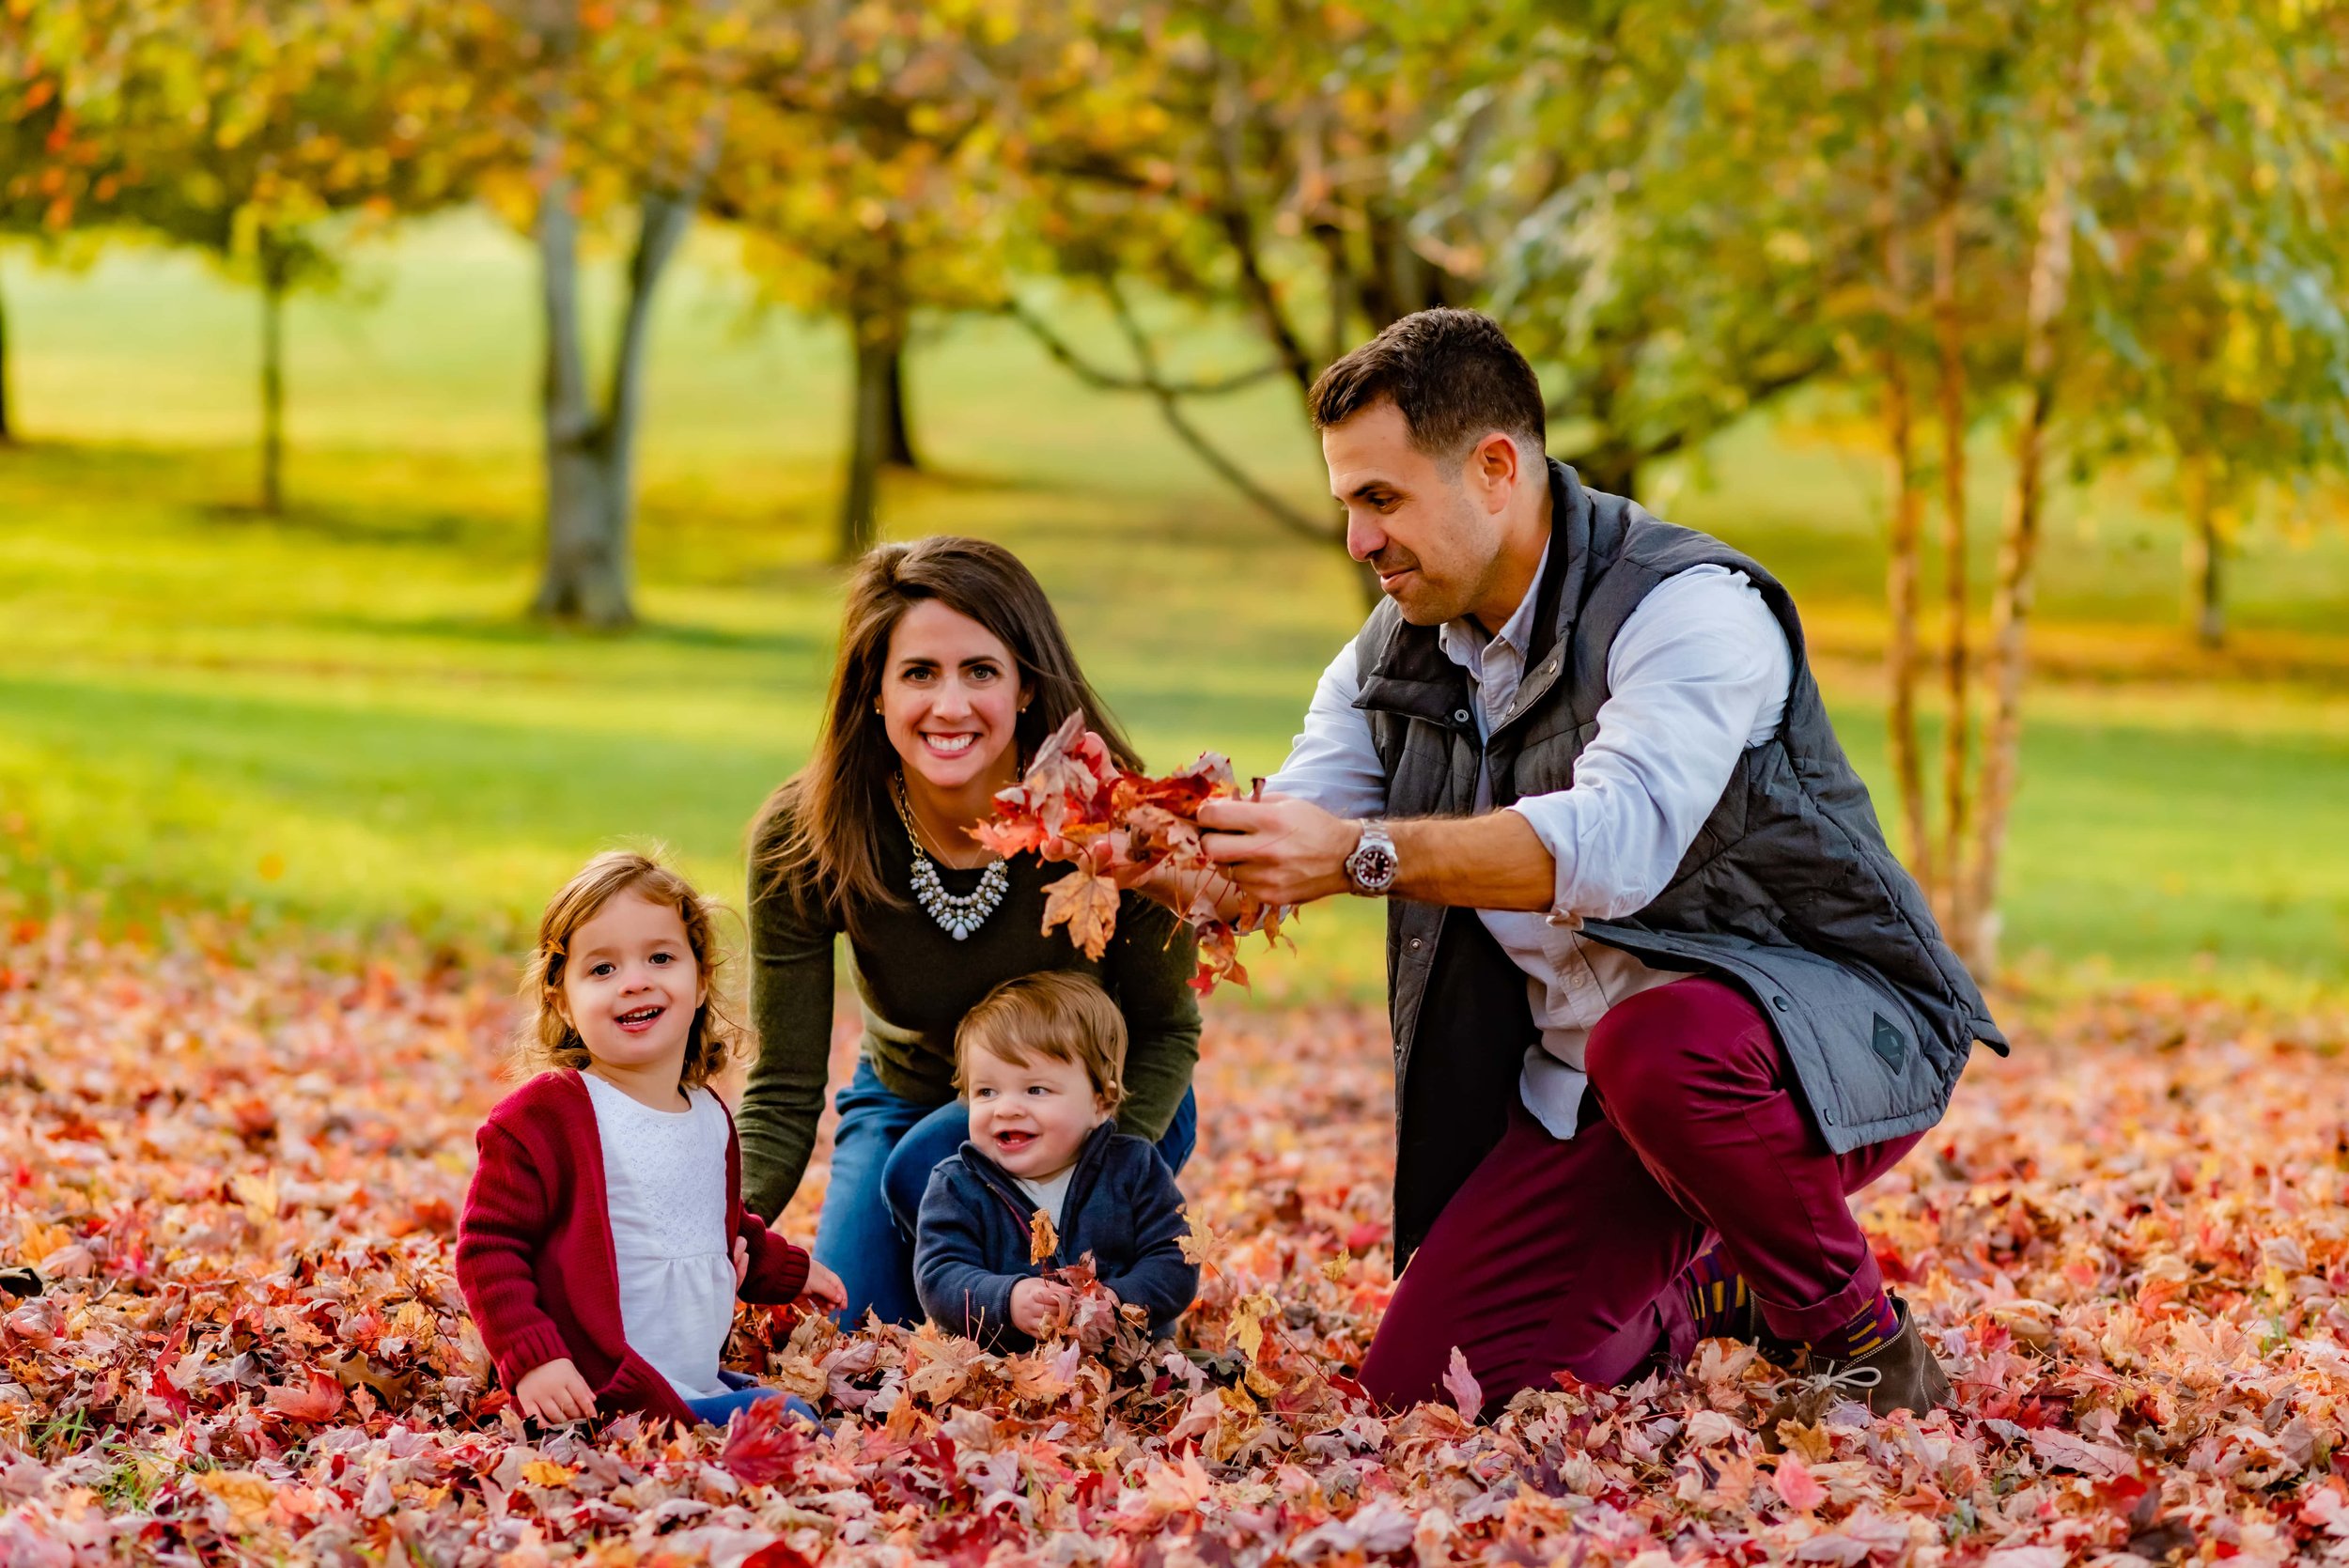 Maryland Family Fall Photo - Sitting in the Leaves